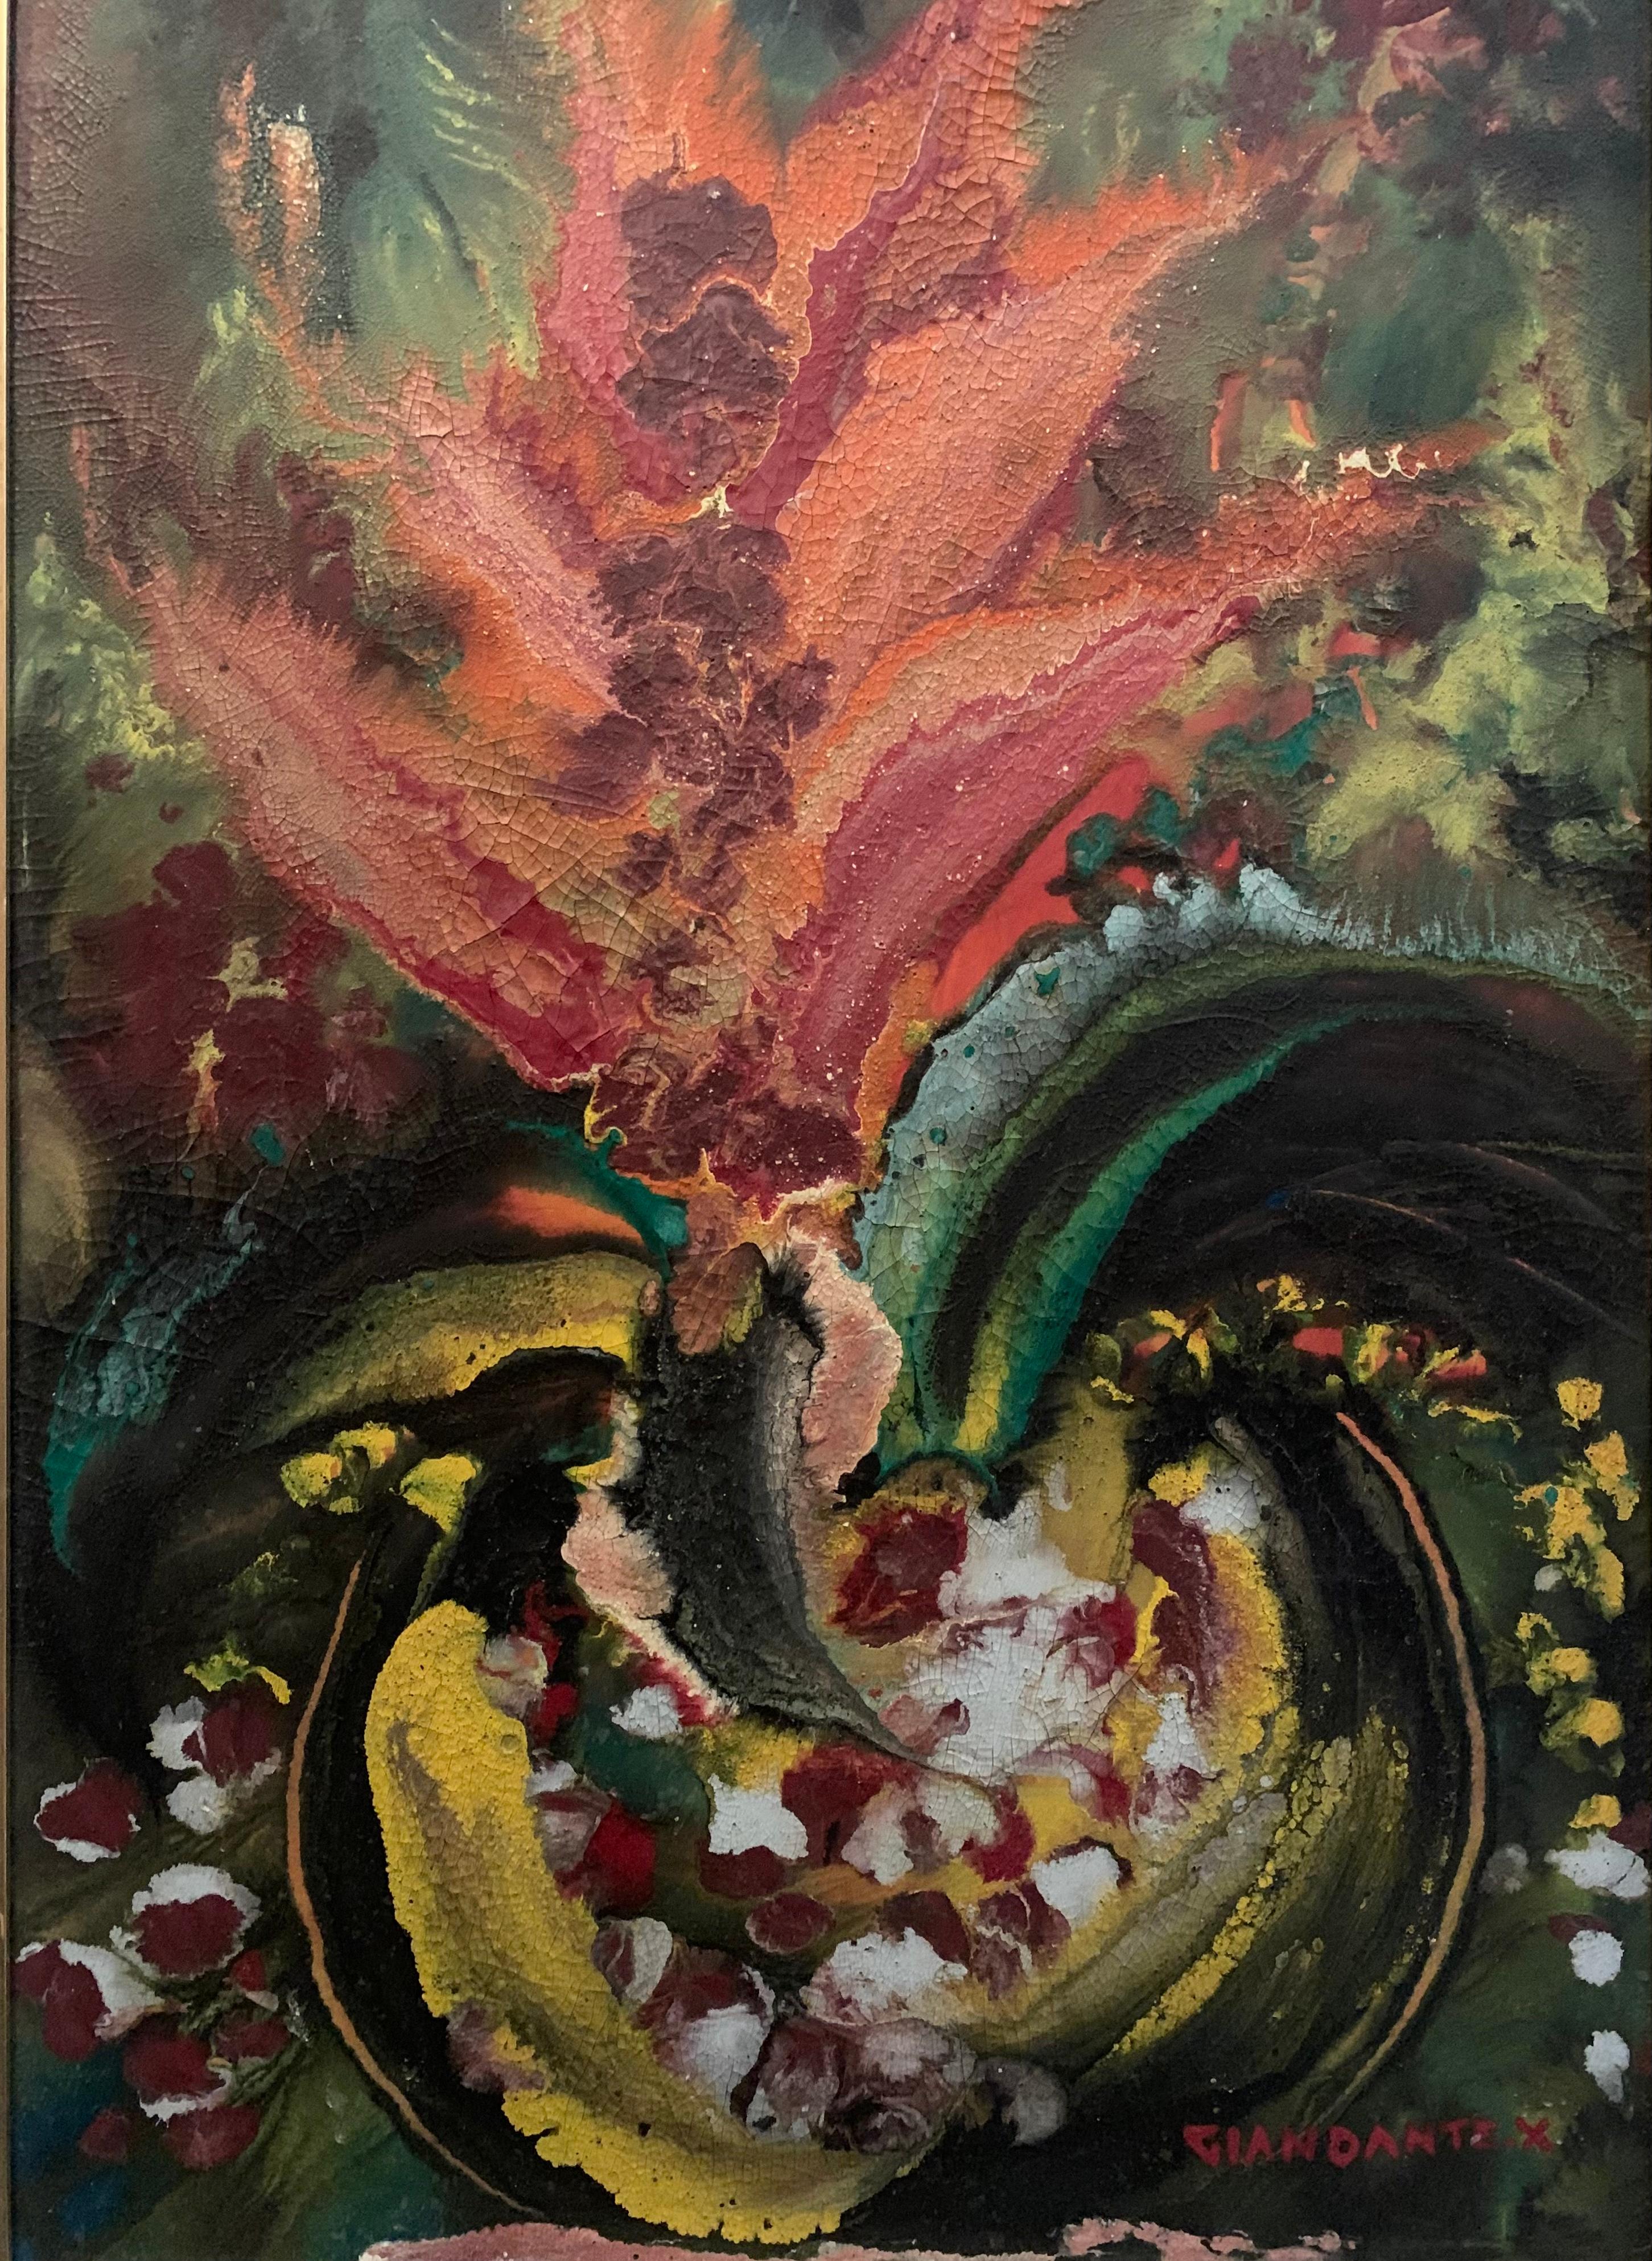 The Flowers: Guzmania. 
Circa 1963. 
Signed Giandante X, a painter born in Milan in 1899 and died in 1984. 

Milano. 
Measurements without the frame: 50 x 35 cm.
On the back is a photocopy of the exhibition label that accompanied the painting in the